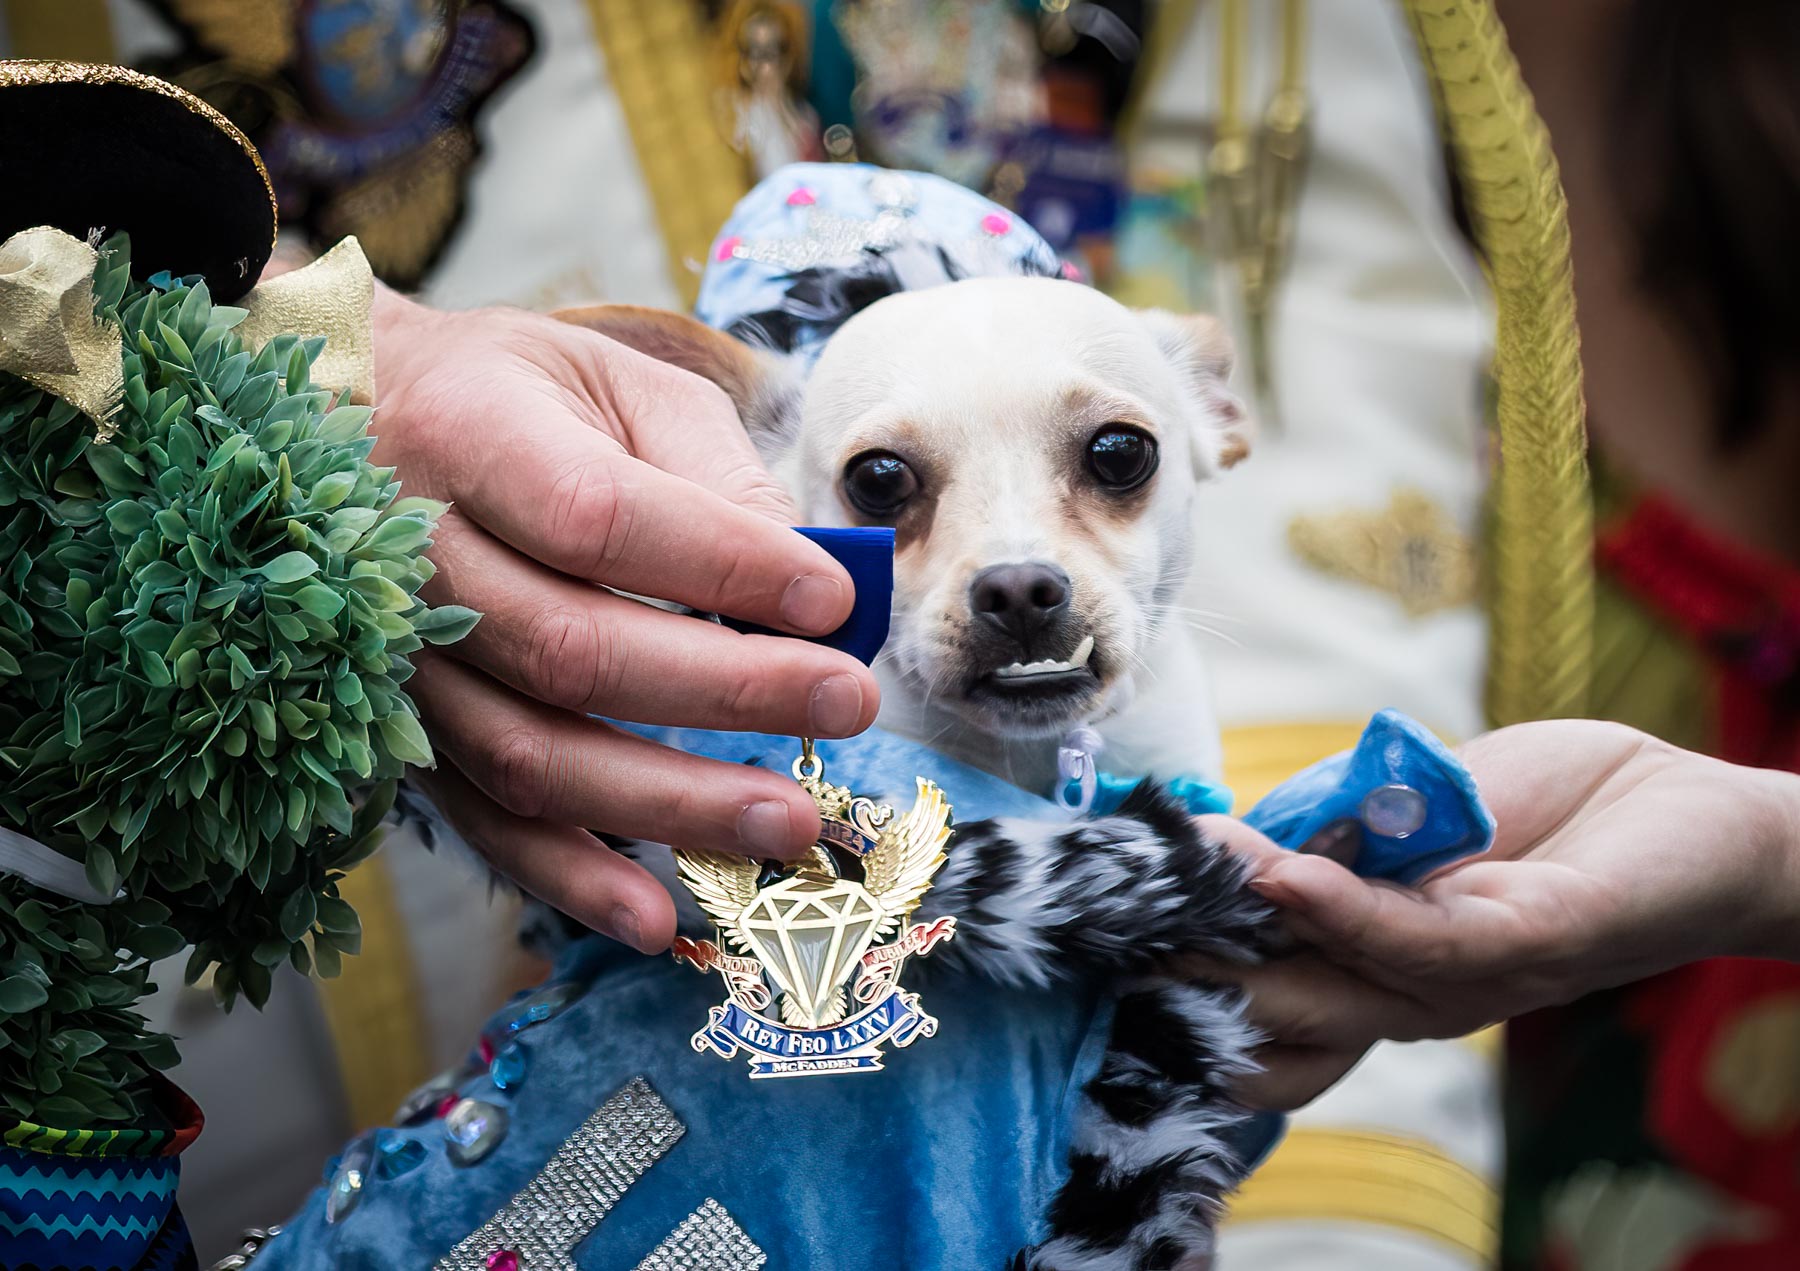 White chihuahua with overbite and hand holding medal in front of dog during Rey Fido event for an article on the best Fiesta photos